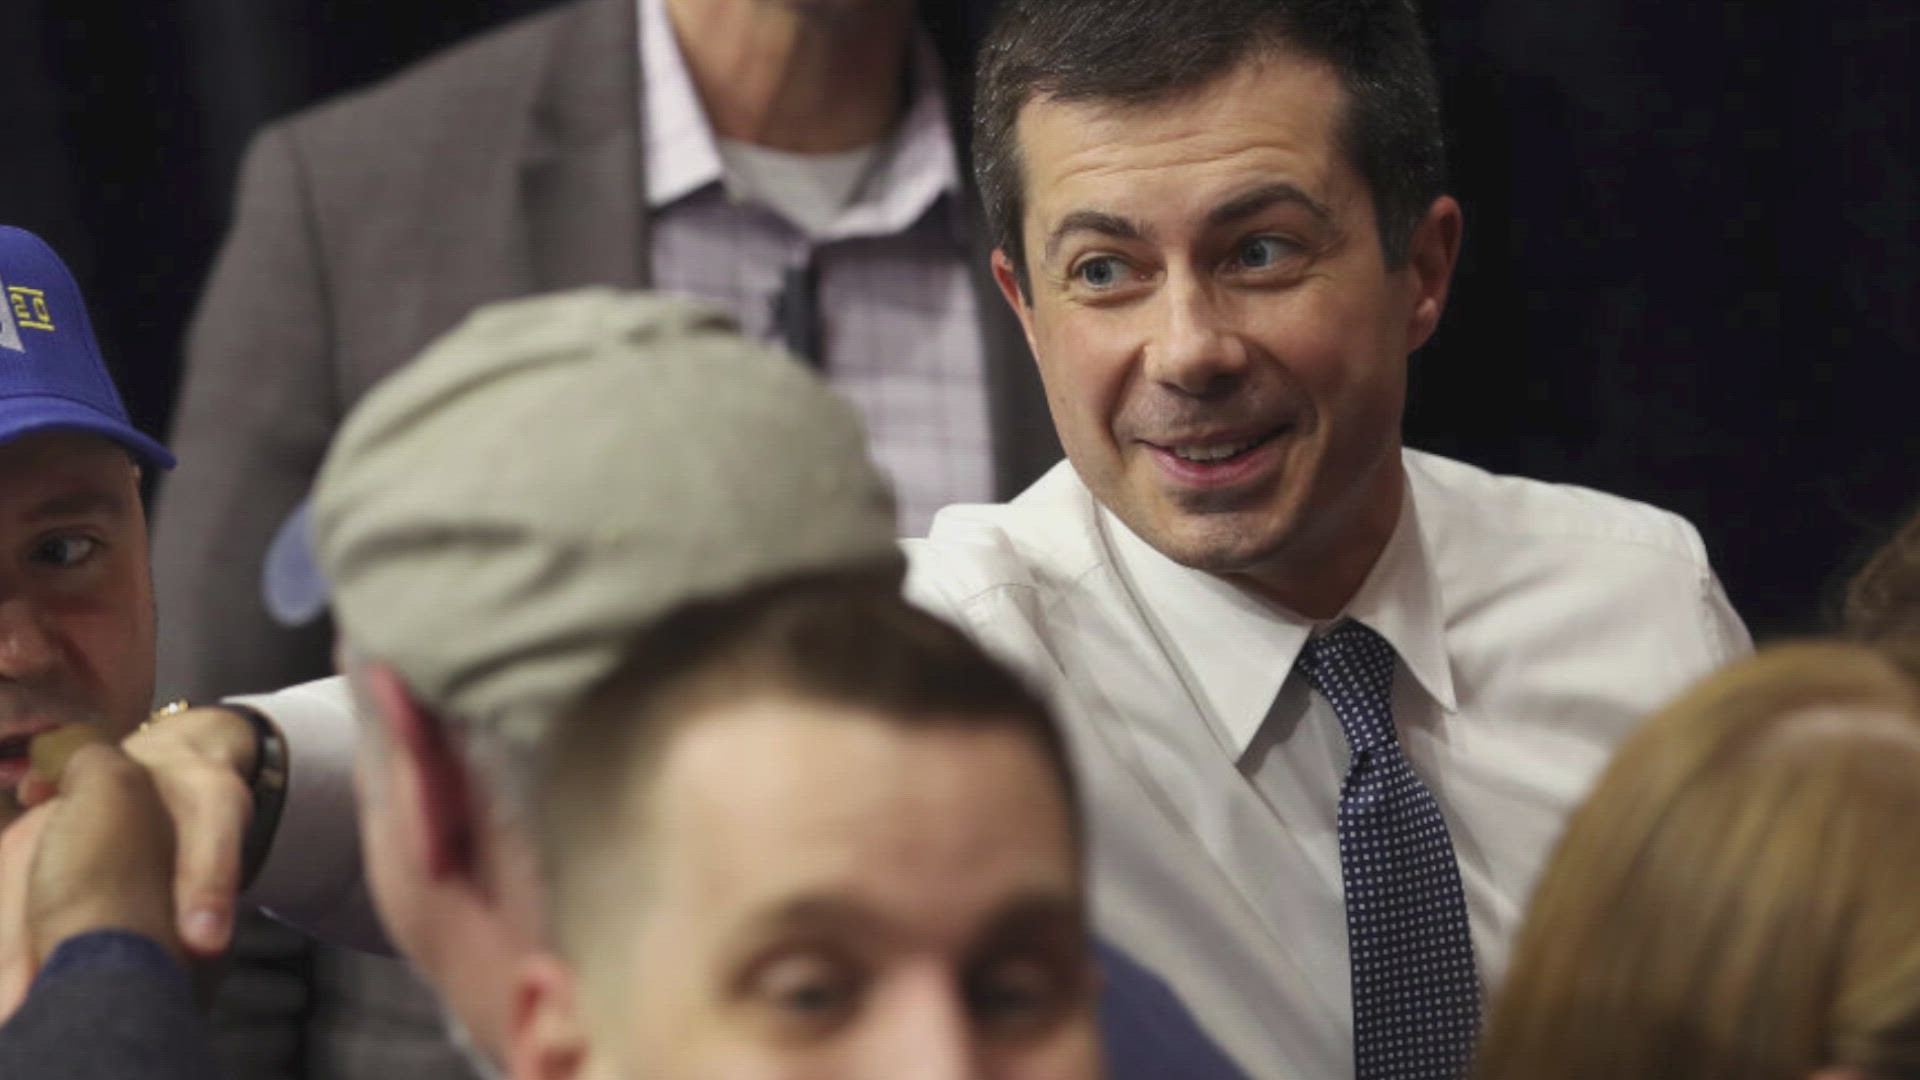 According to a new report, Democratic Presidential candidate Pete Buttigieg worked as an intern at a local news station in Chicago.